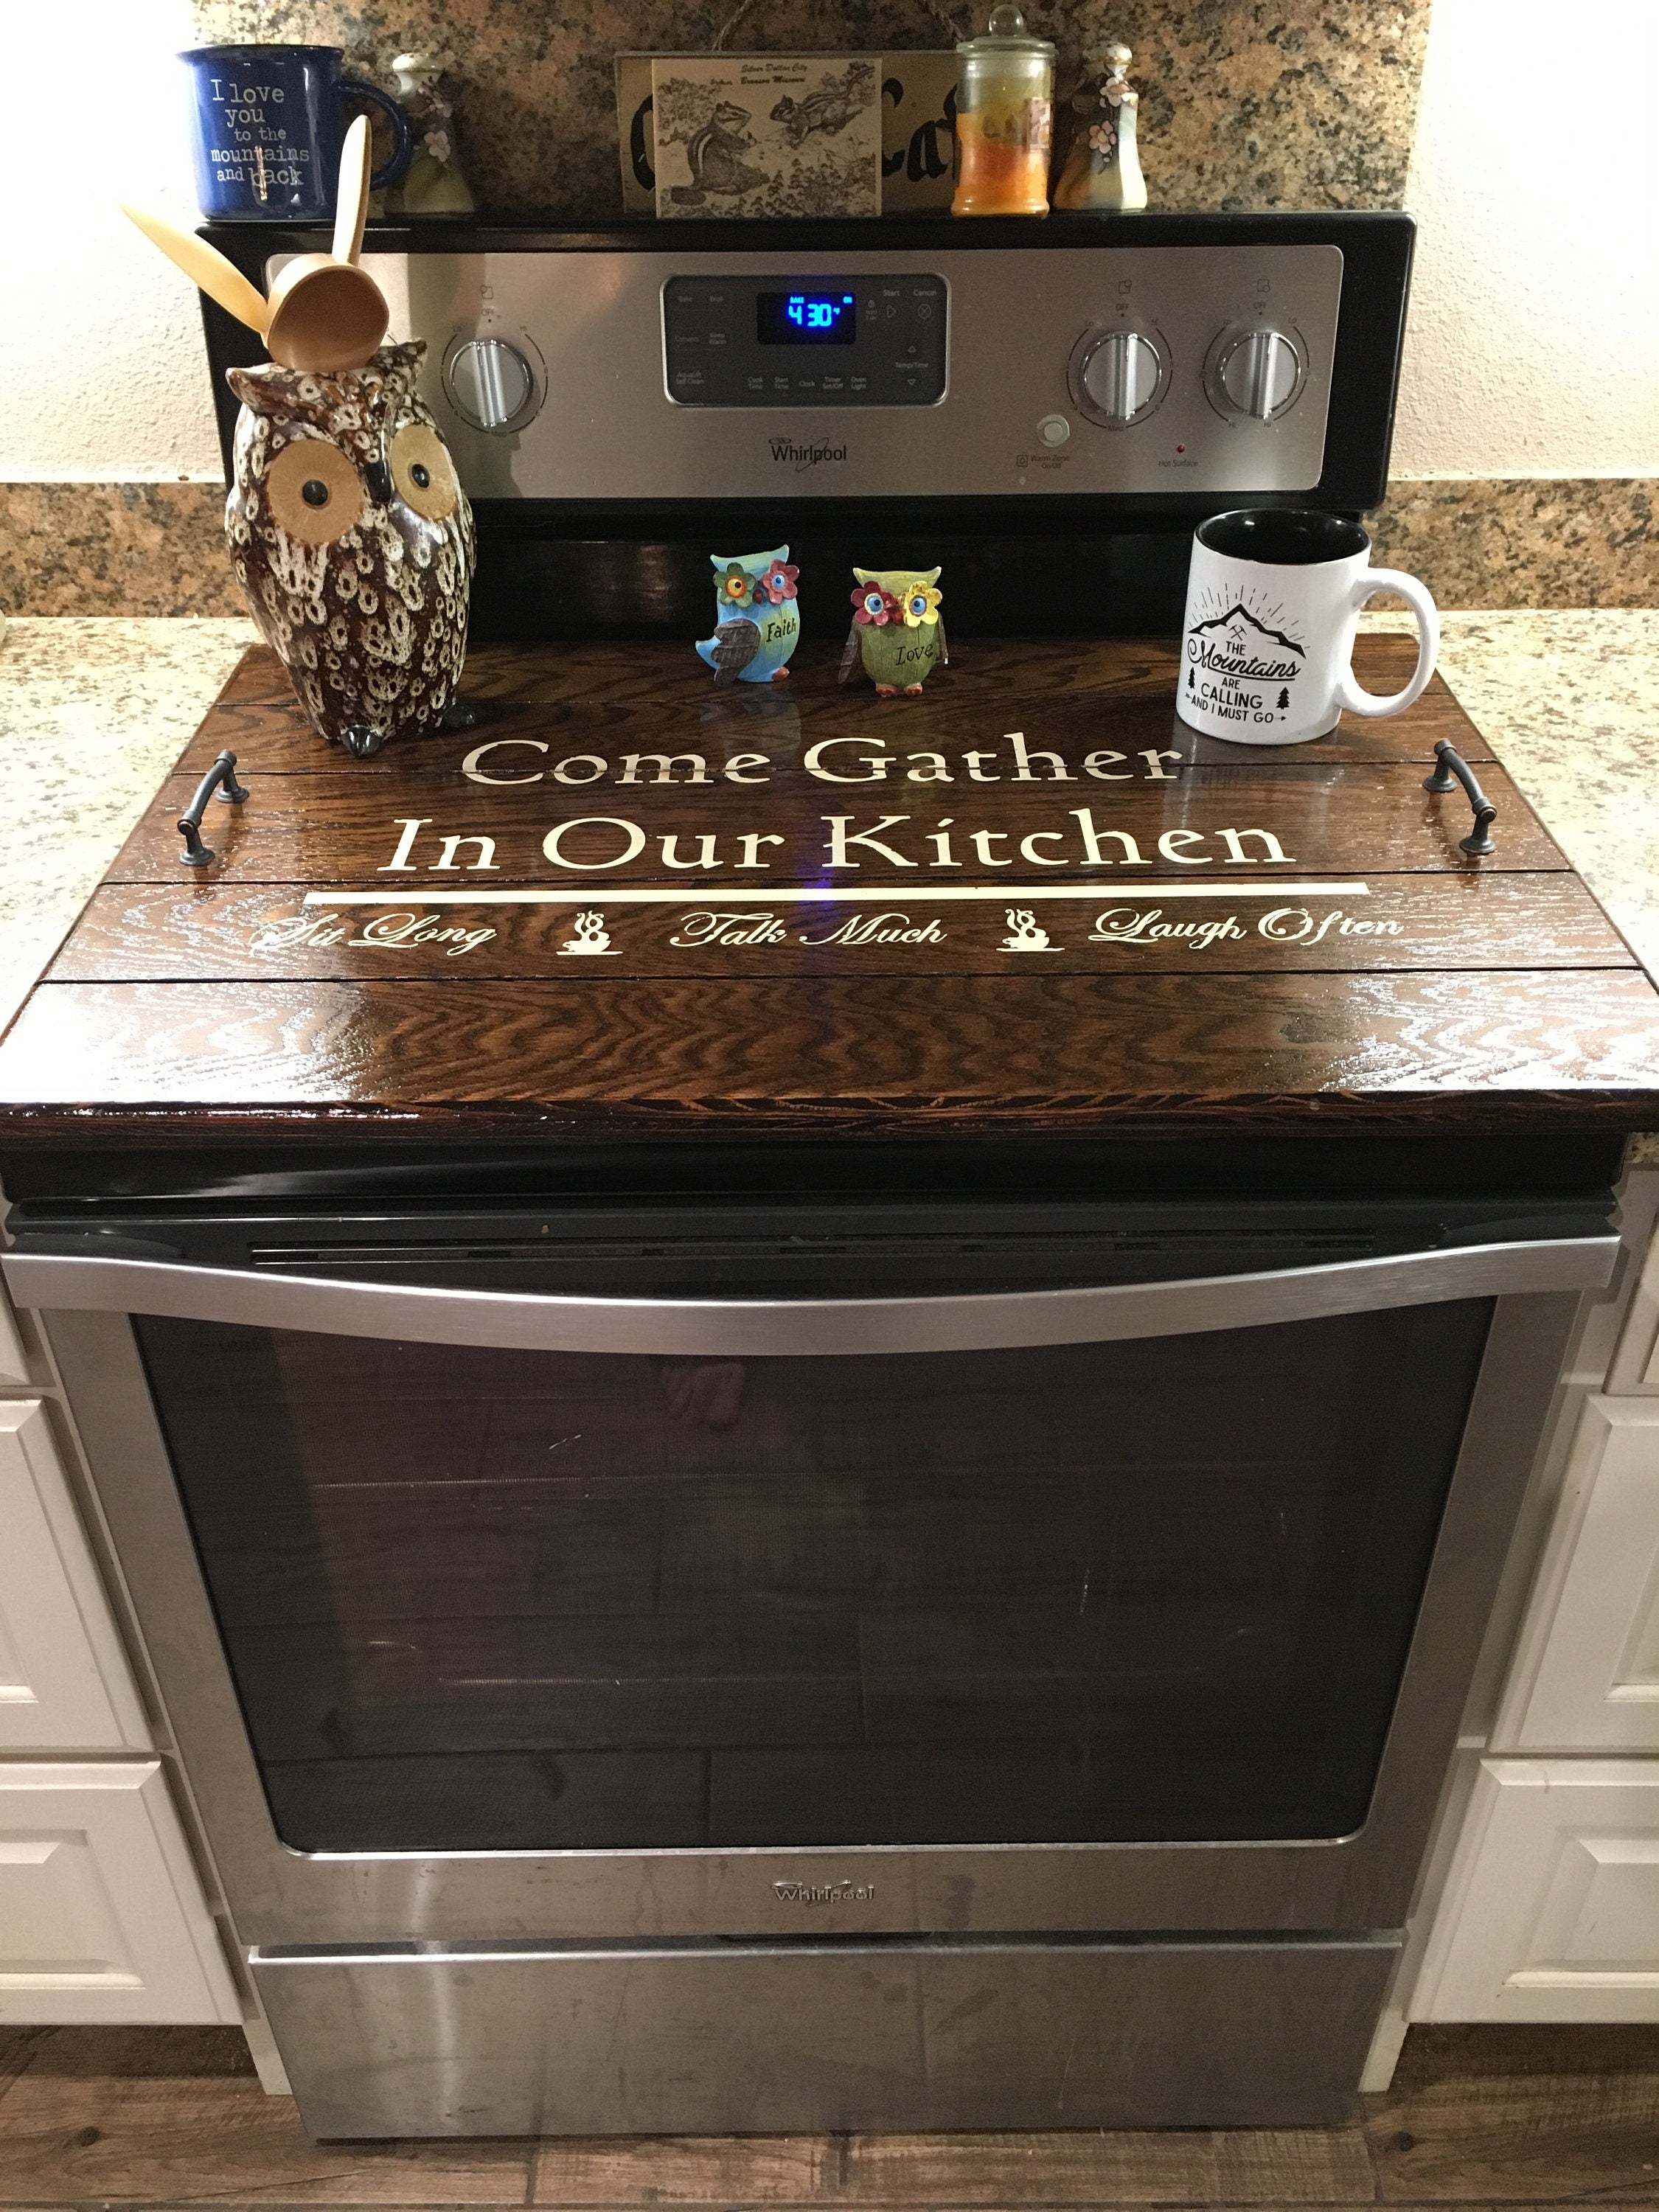 Stove top cover, Noodle Board Farmhouse Kitchen Stovetop Cover, Wooden Stove Cover, Personalized Gift